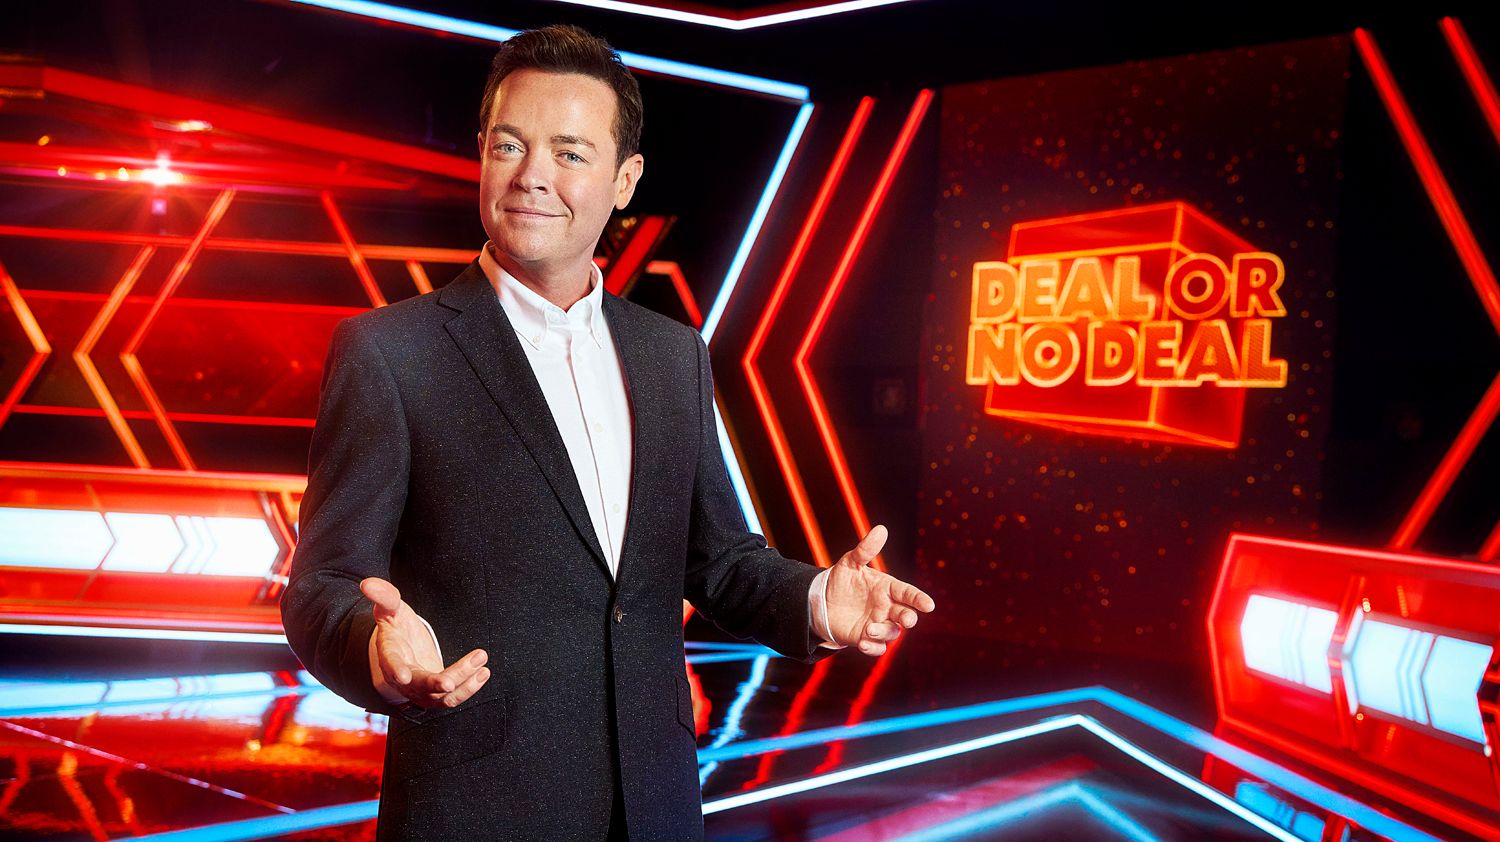 Everything you need to know about Deal or No Deal's return